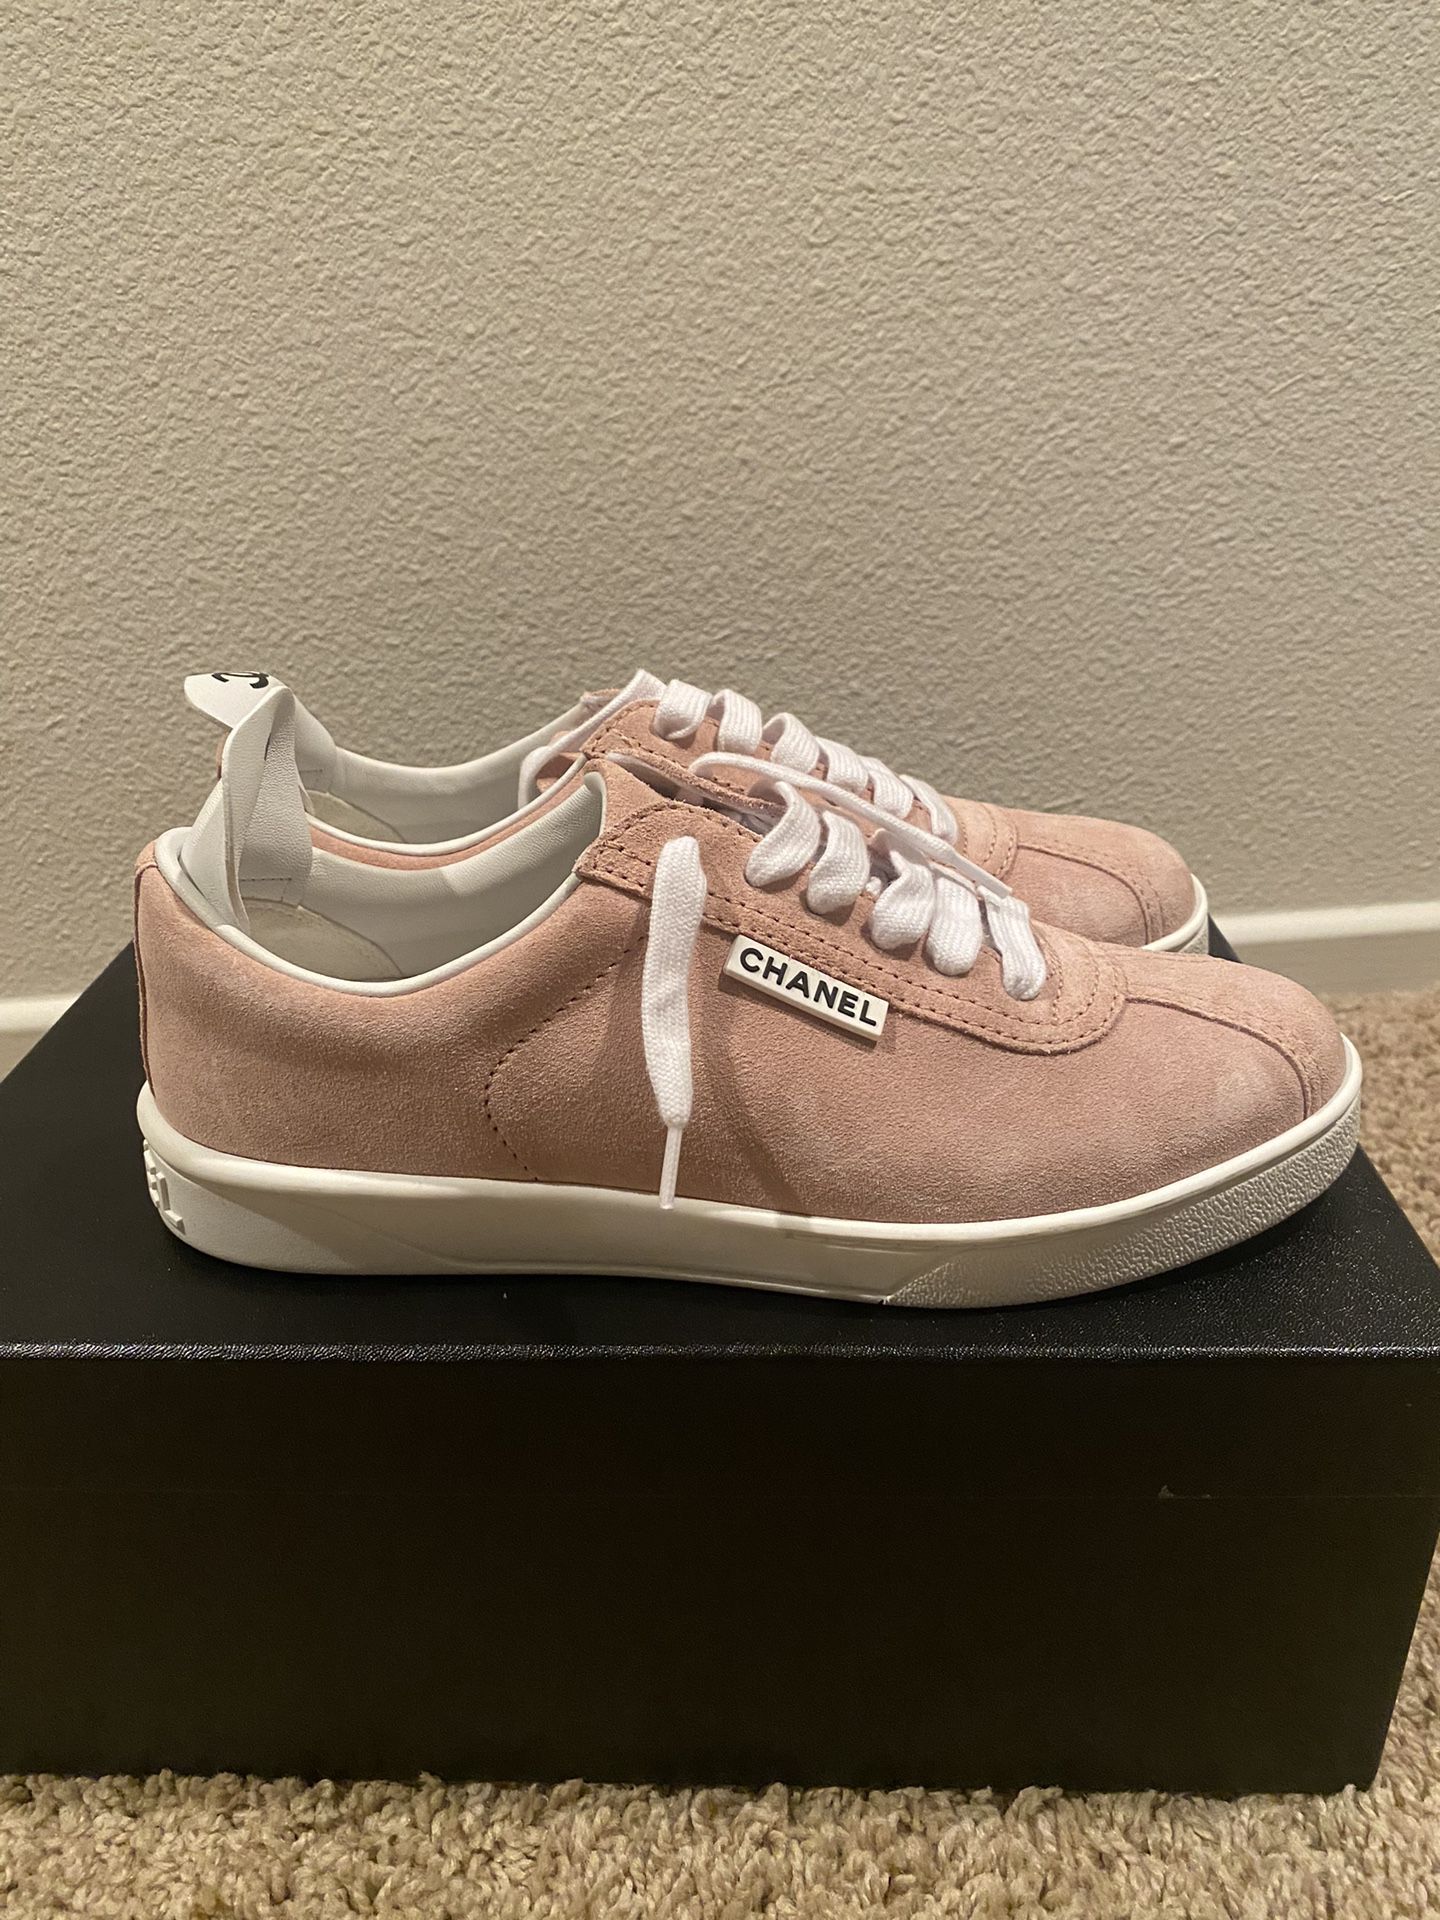 Authentic Chanel Trainers / Sneakers for Sale in Cleveland, OH - OfferUp